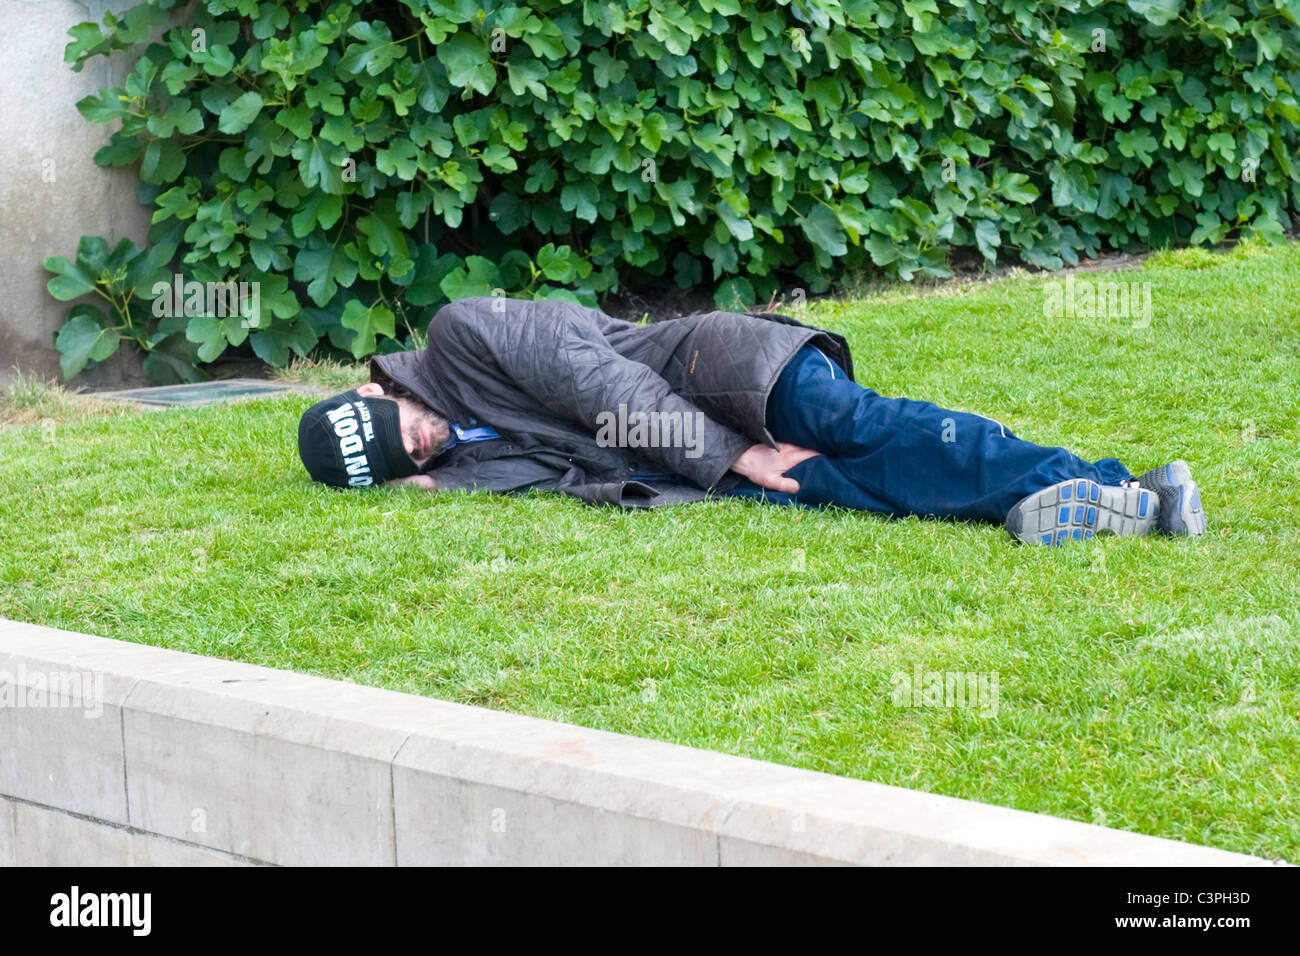 London , Westminster , National Gallery , young man sleeping on lawn of National Gallery homeless vagrant tramp hobo tourist ? Stock Photo